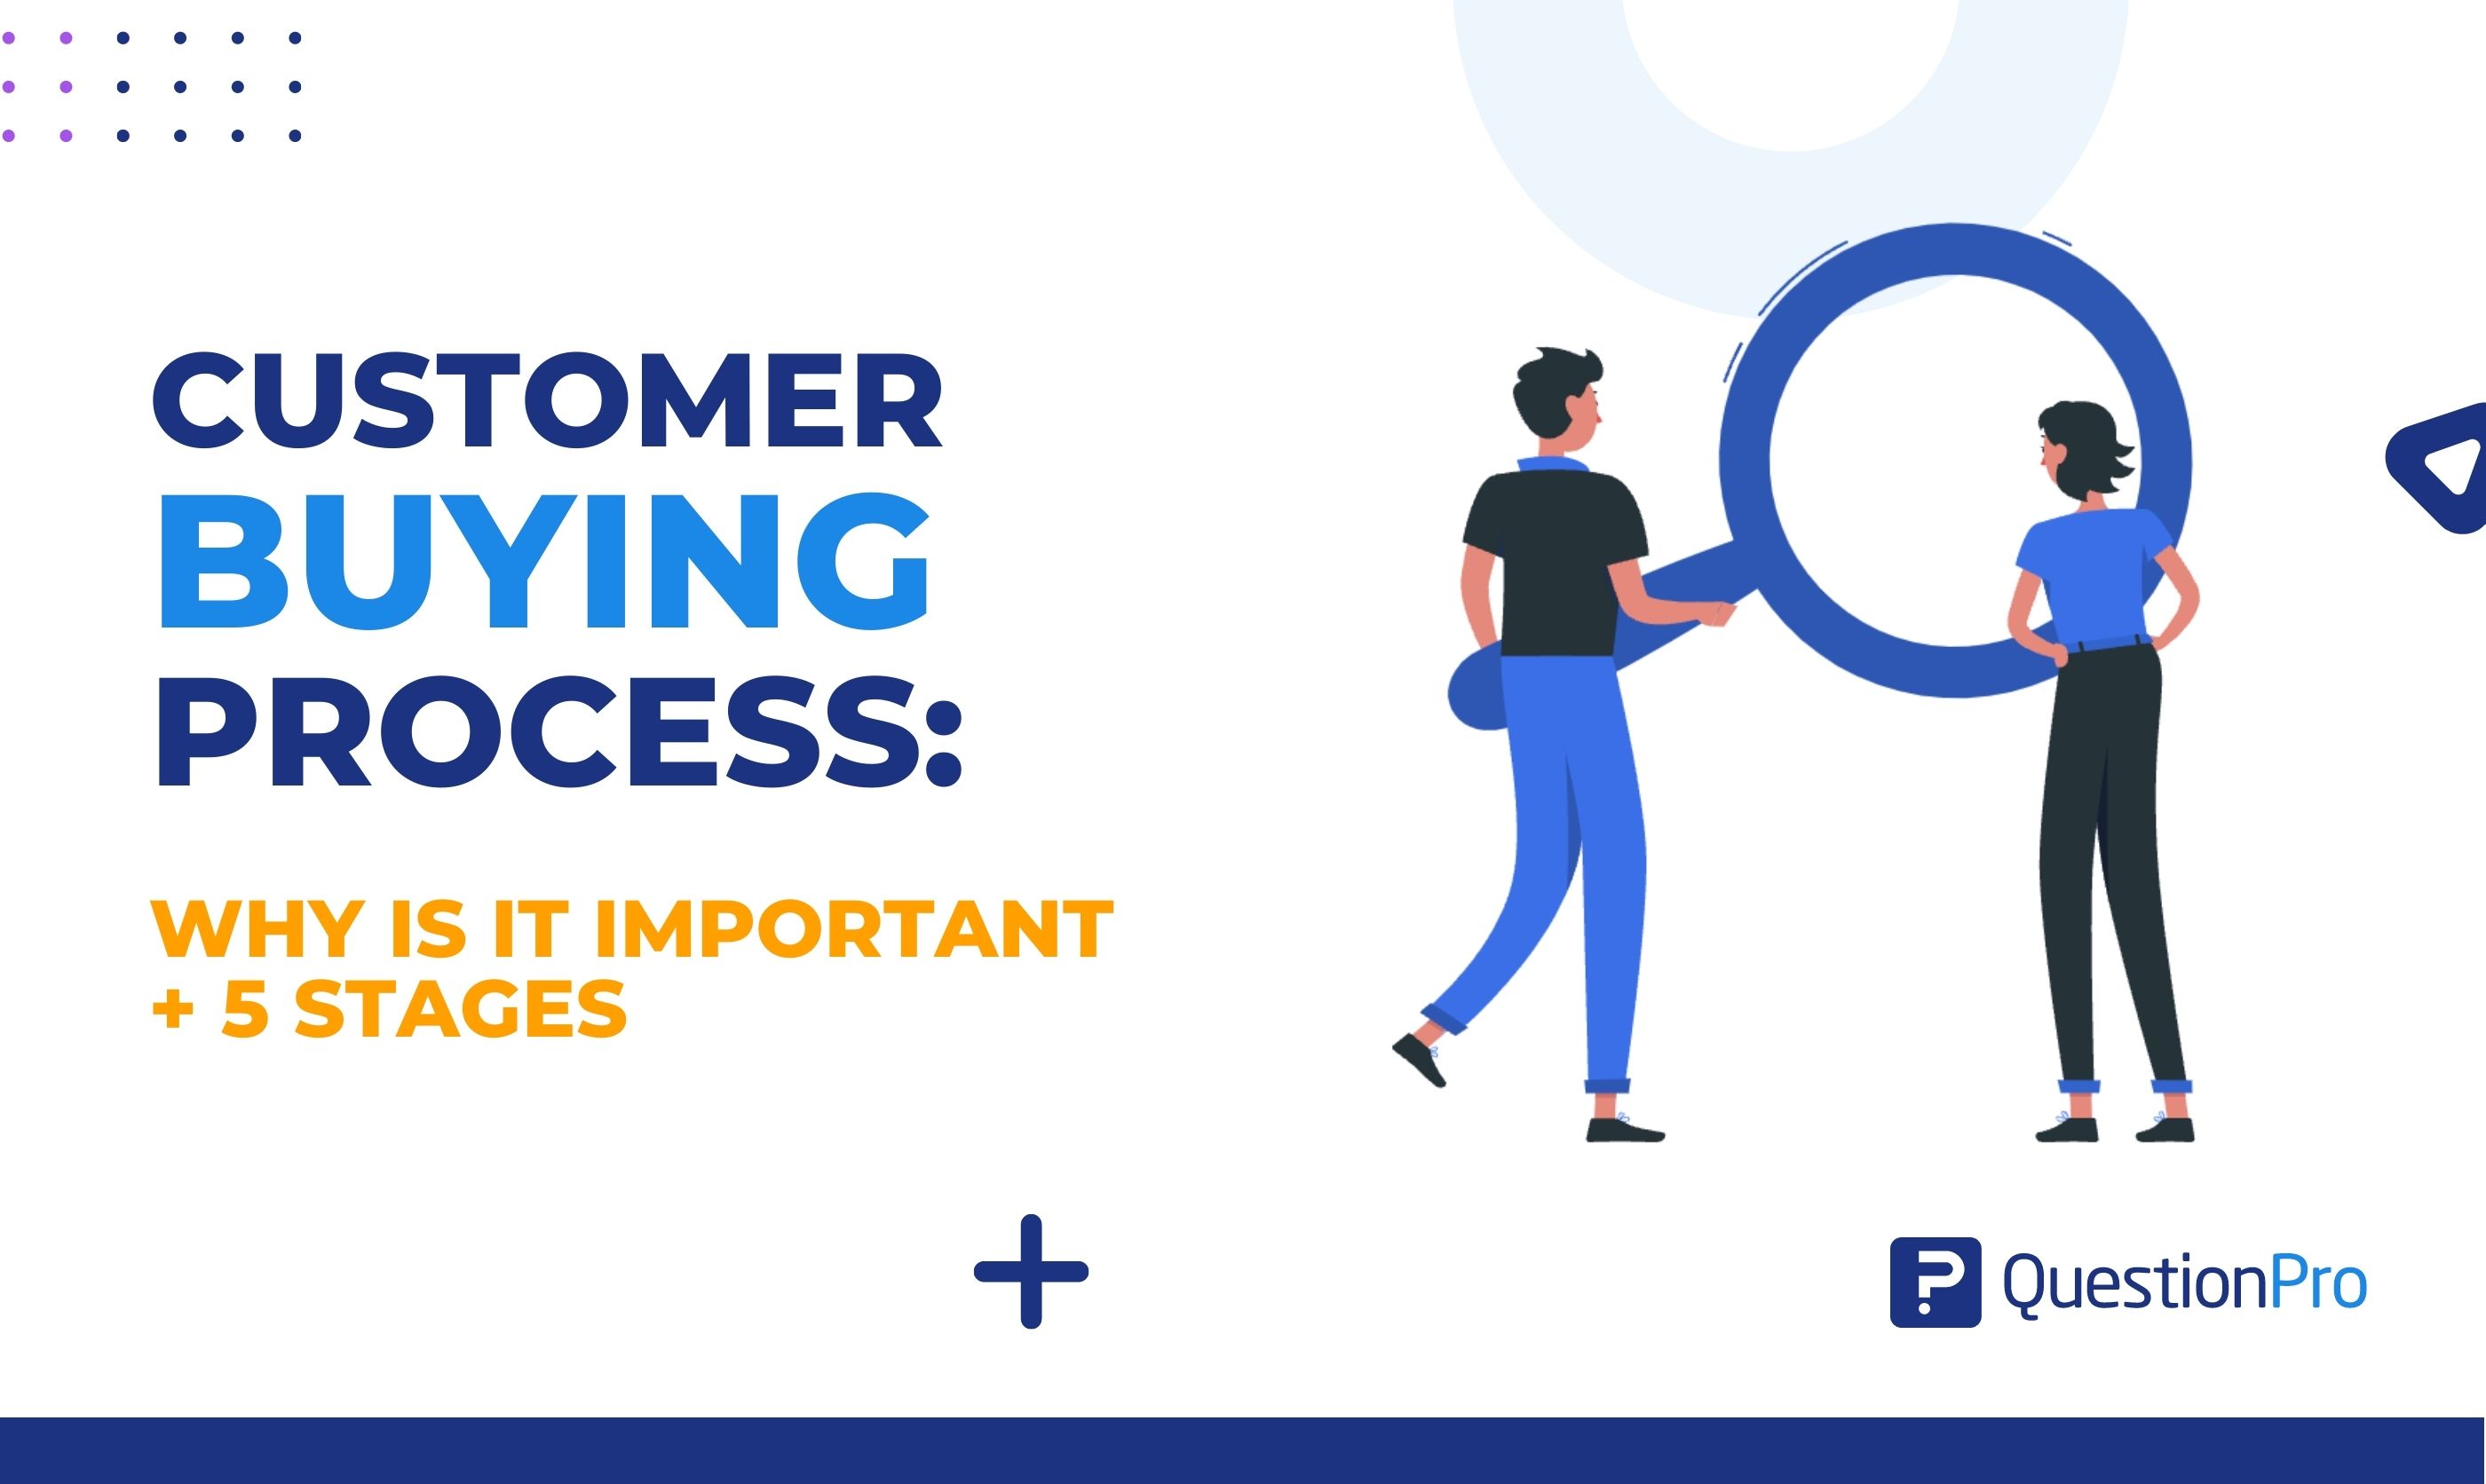 The customer buying process has five stages. Knowing them helps you see where the customer is in the process and how to guide them.